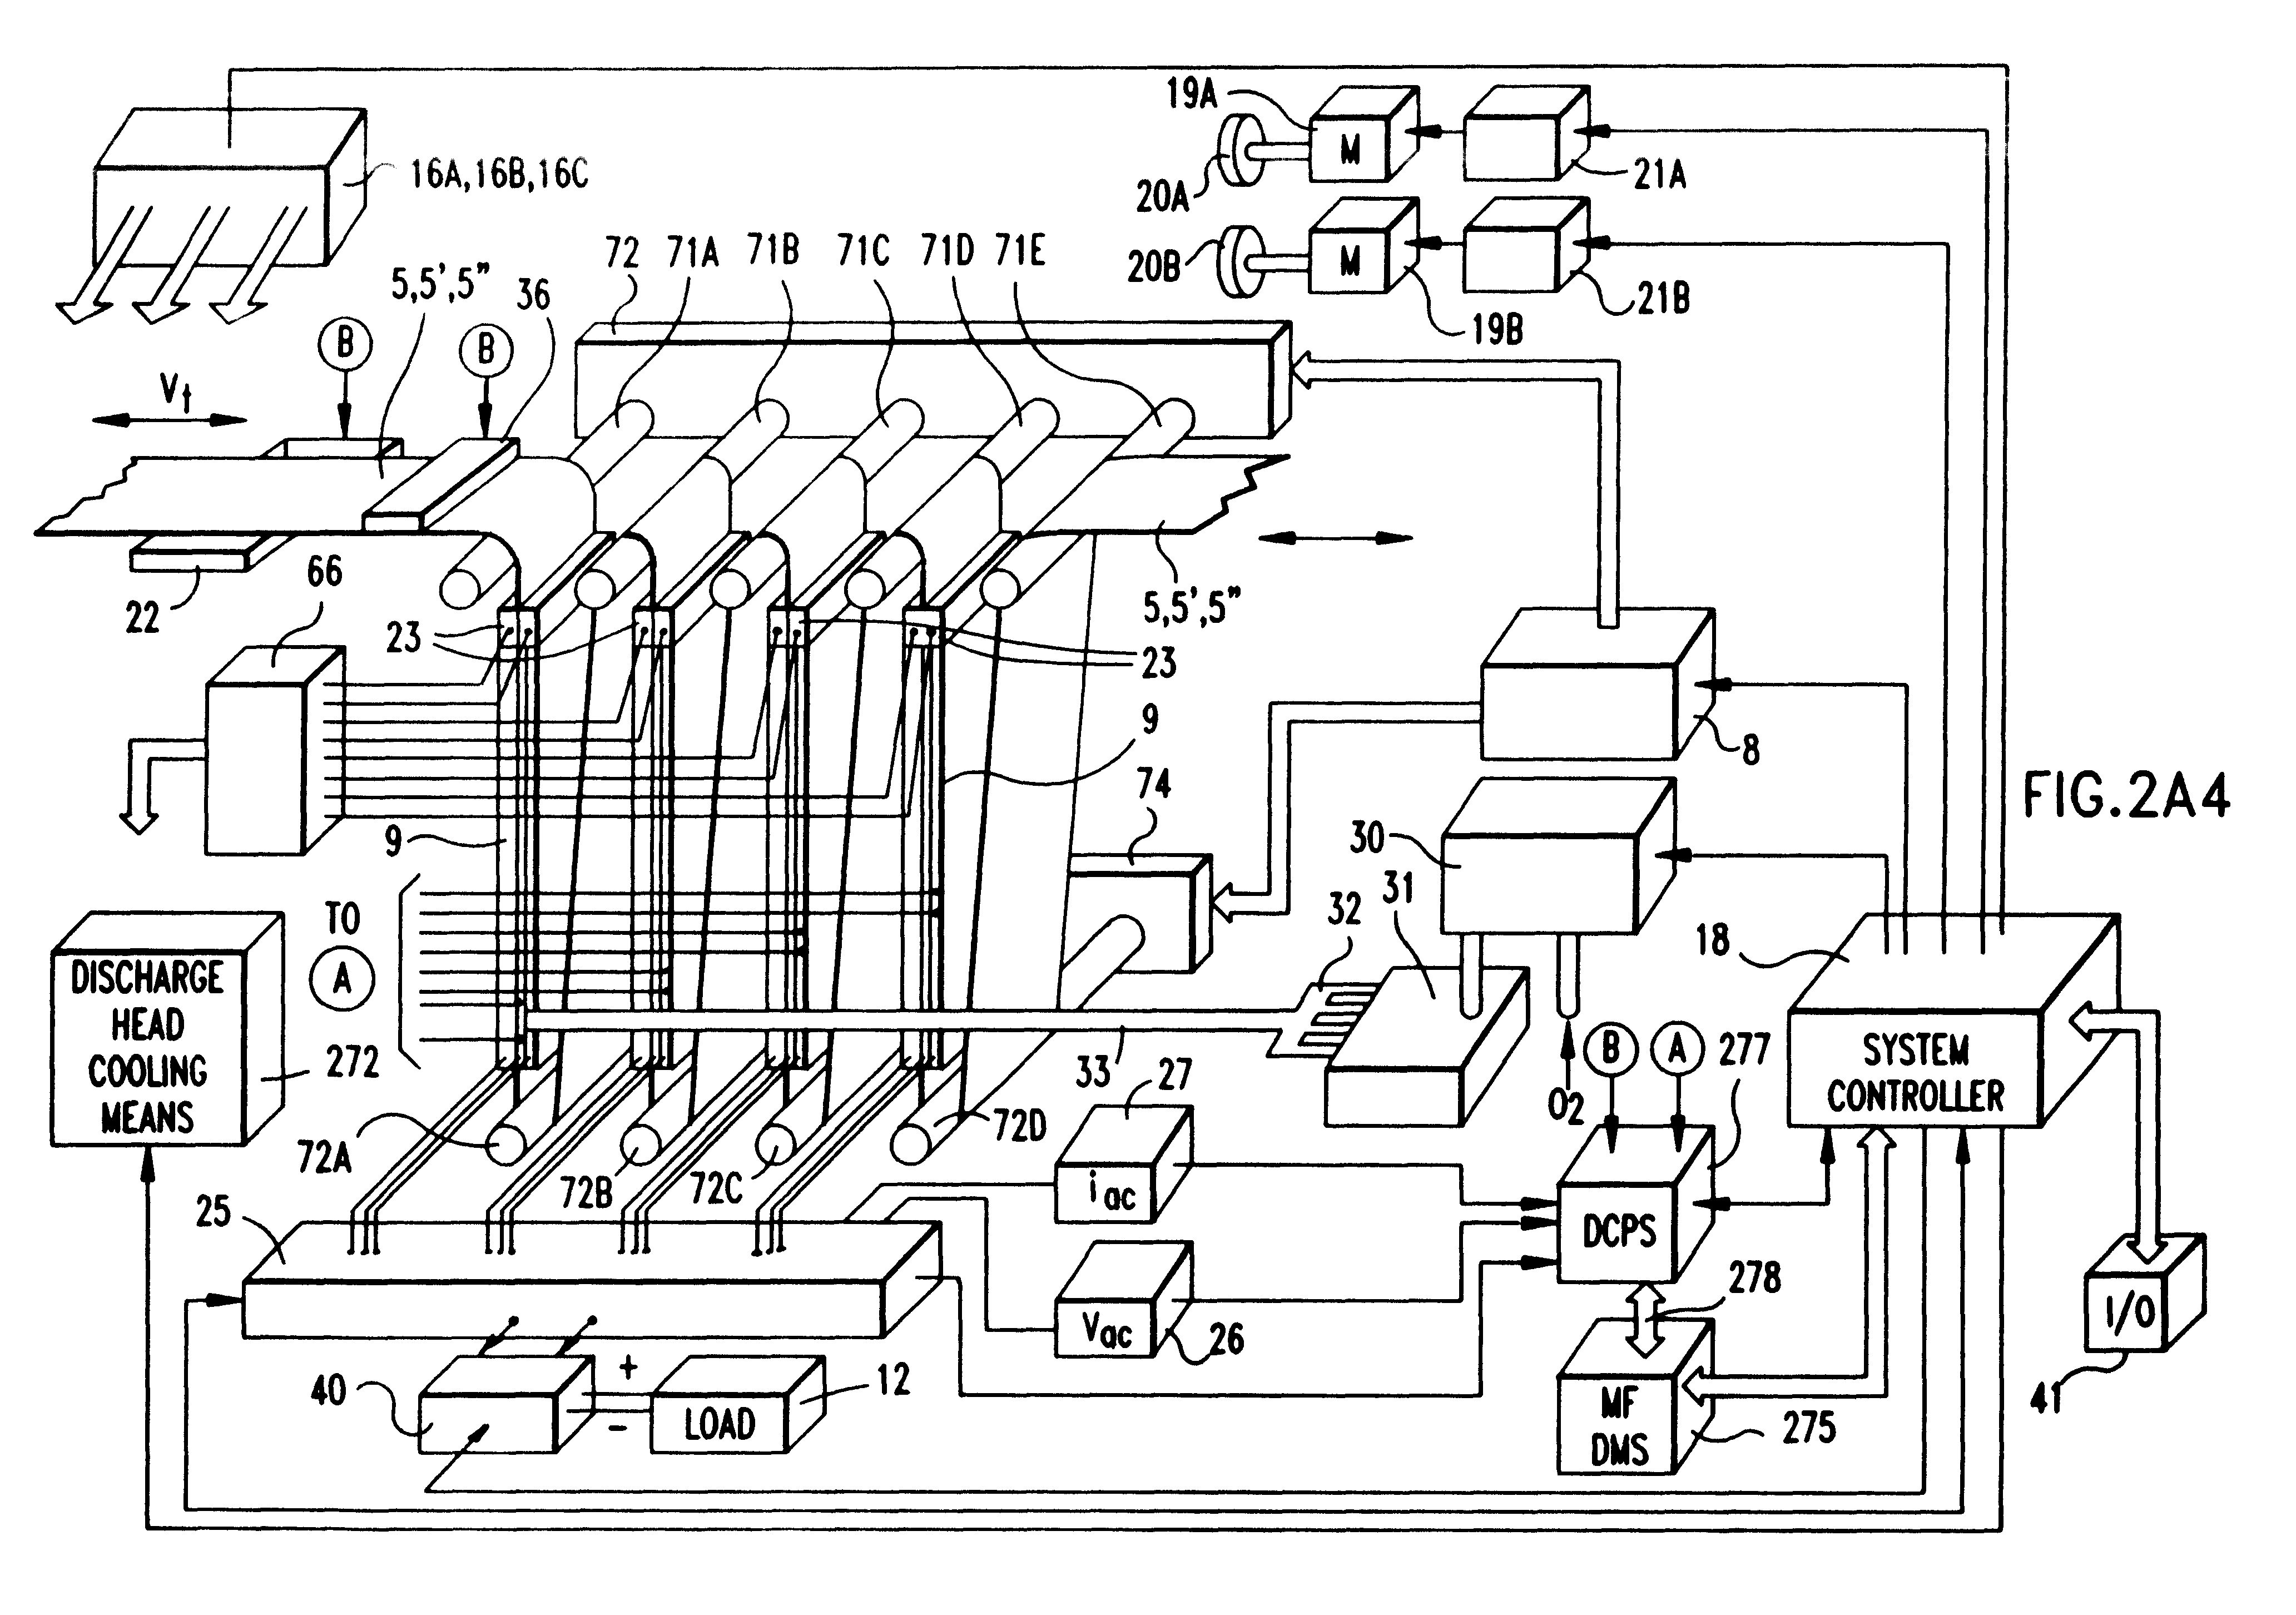 Metal-air fuel cell battery system having means for controlling discharging and recharging parameters for improved operating efficiency